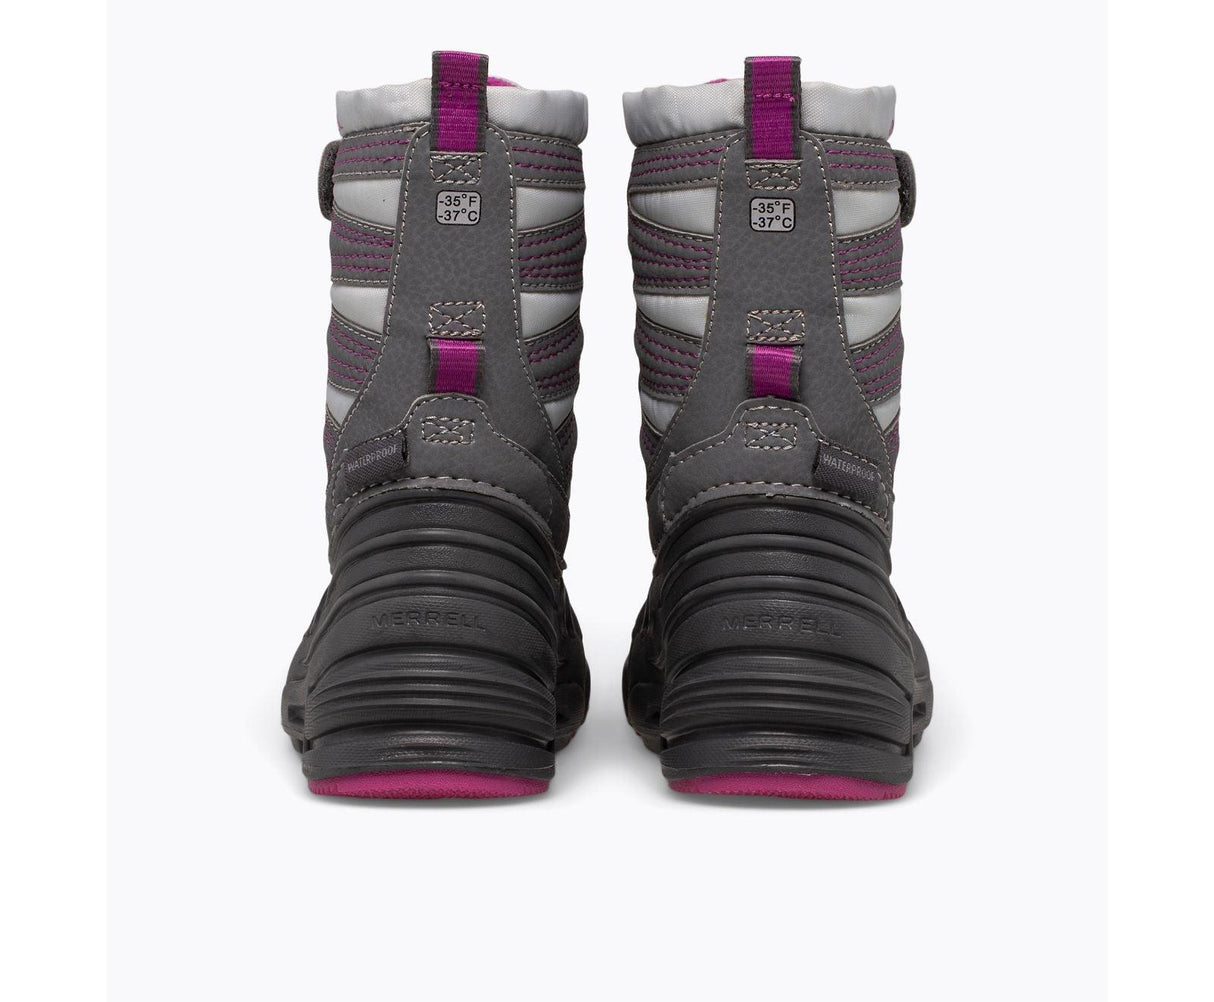 Merrell Toddler Girls Snow Quest Boots - A&M Clothing & Shoes